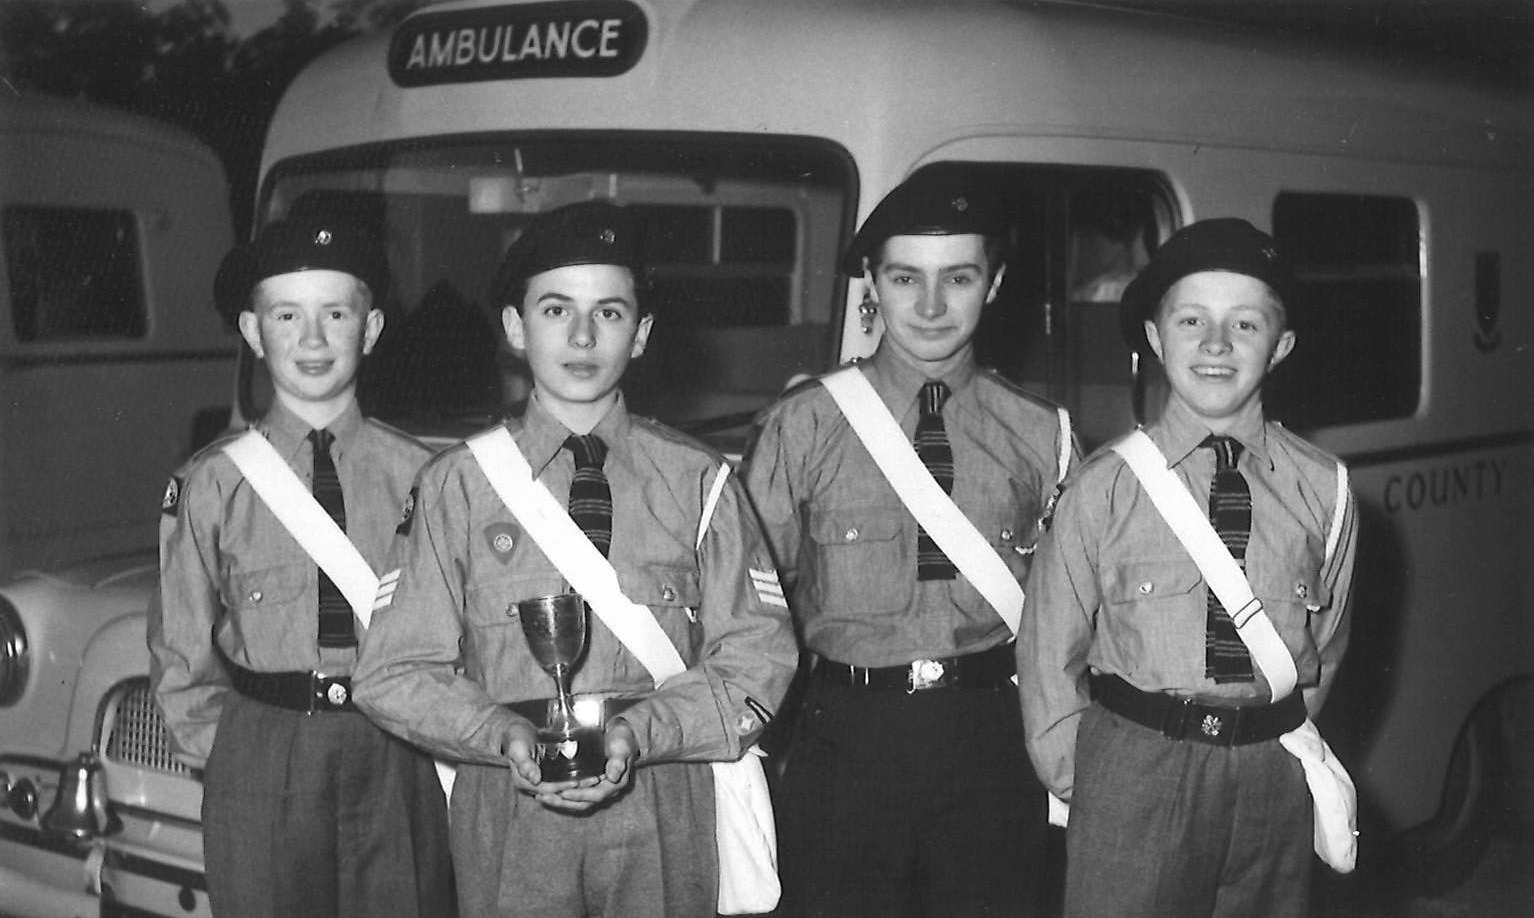 A black and white photograph showing four young St John Ambulance Cadets standing in front of an old ambulance. The Cadets are wearing berets on their heads, grey shirts, stripey ties, and a white haversack across their bodies. Their dark grey trousers are belted at the waist with a black belt and silver clasp. The Cadet second from left, holds a small trophy close to his body with both hands.